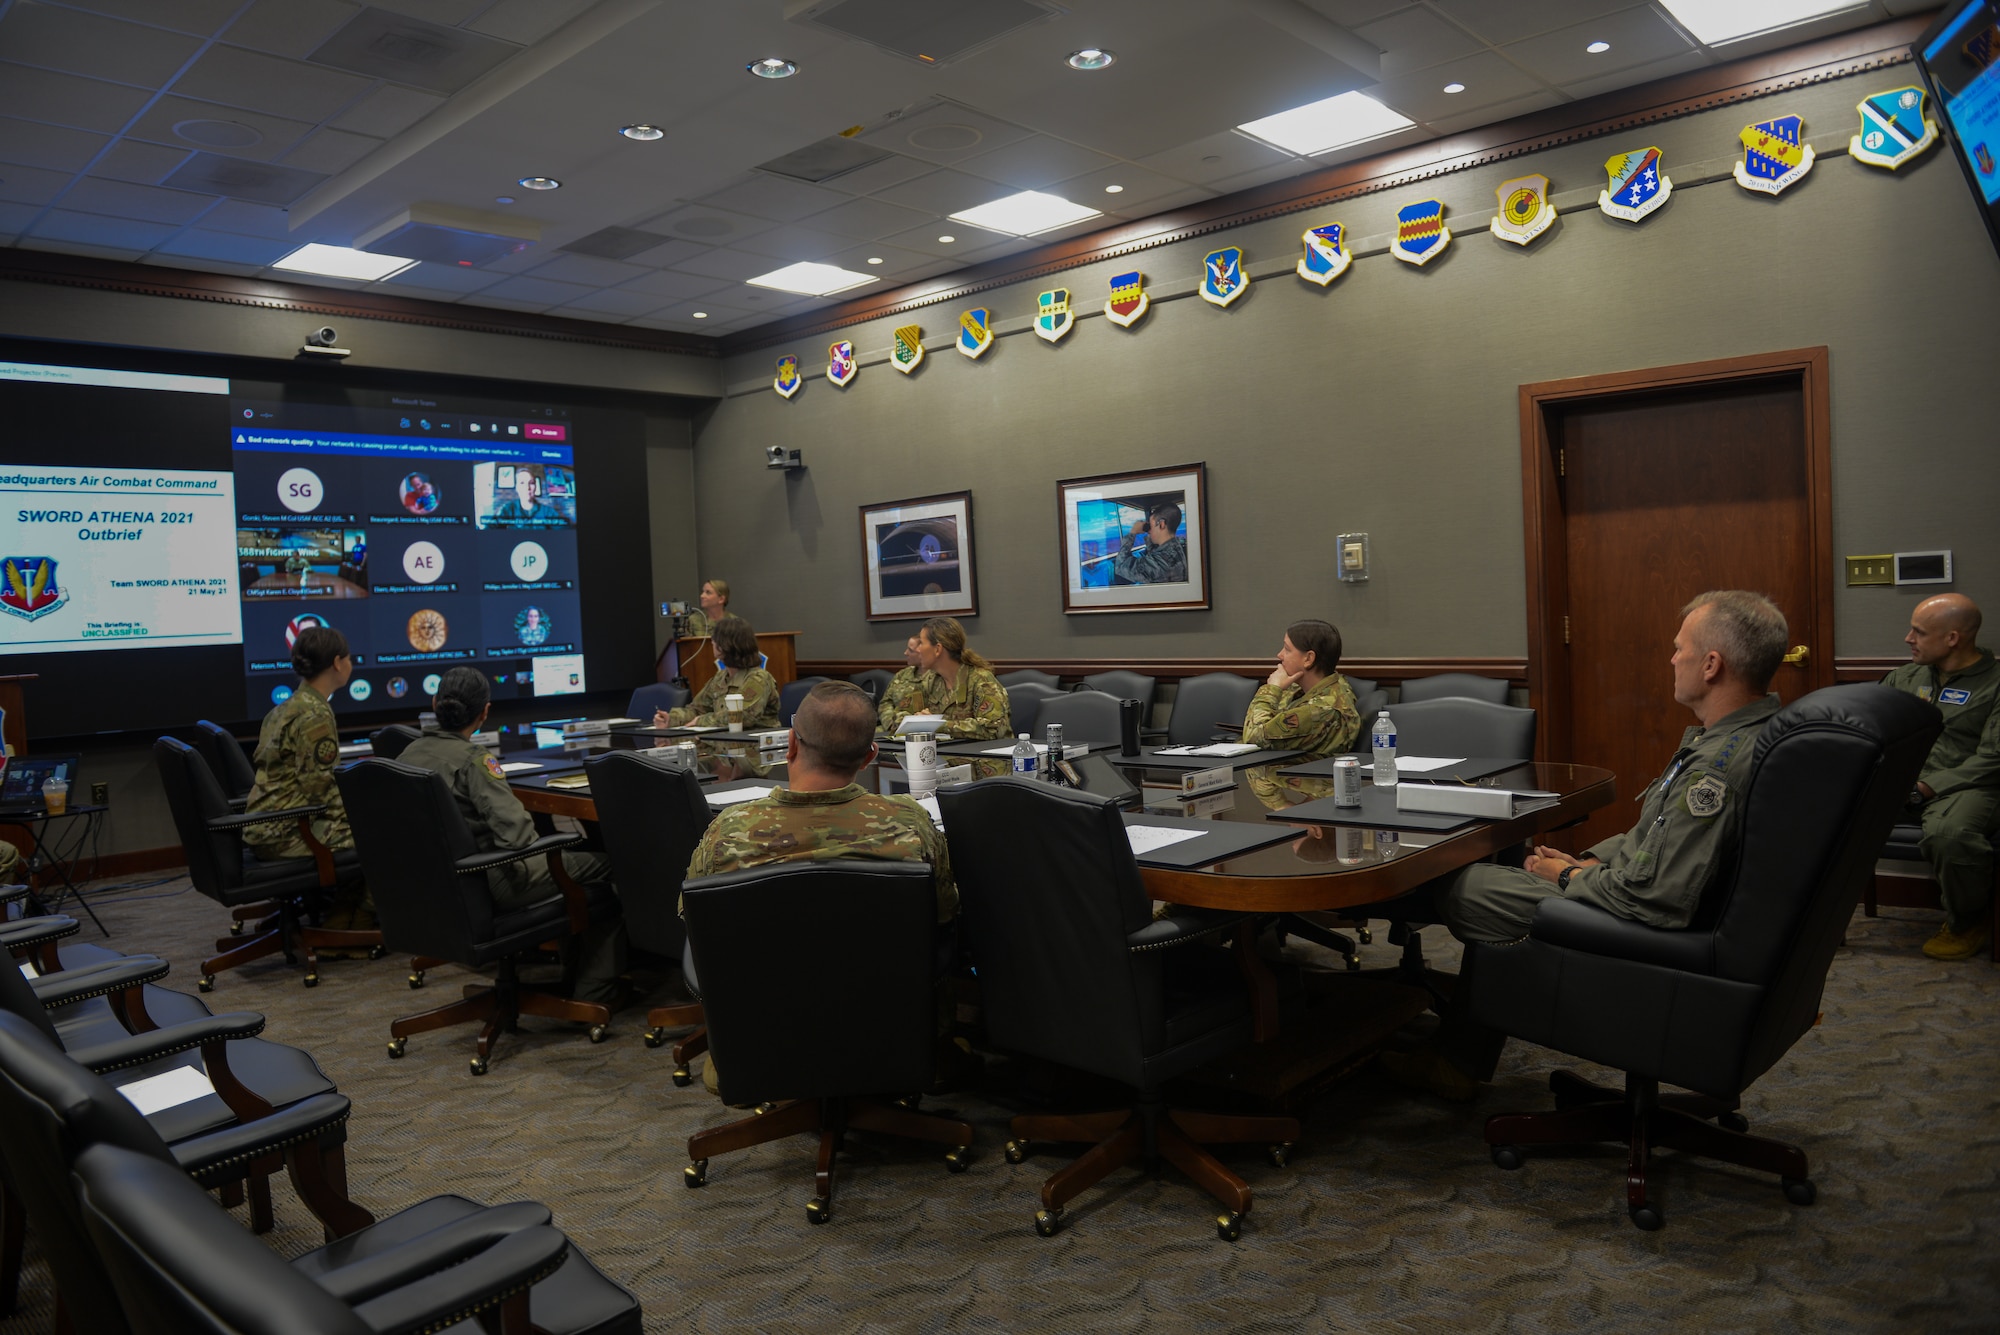 Military members in conference room